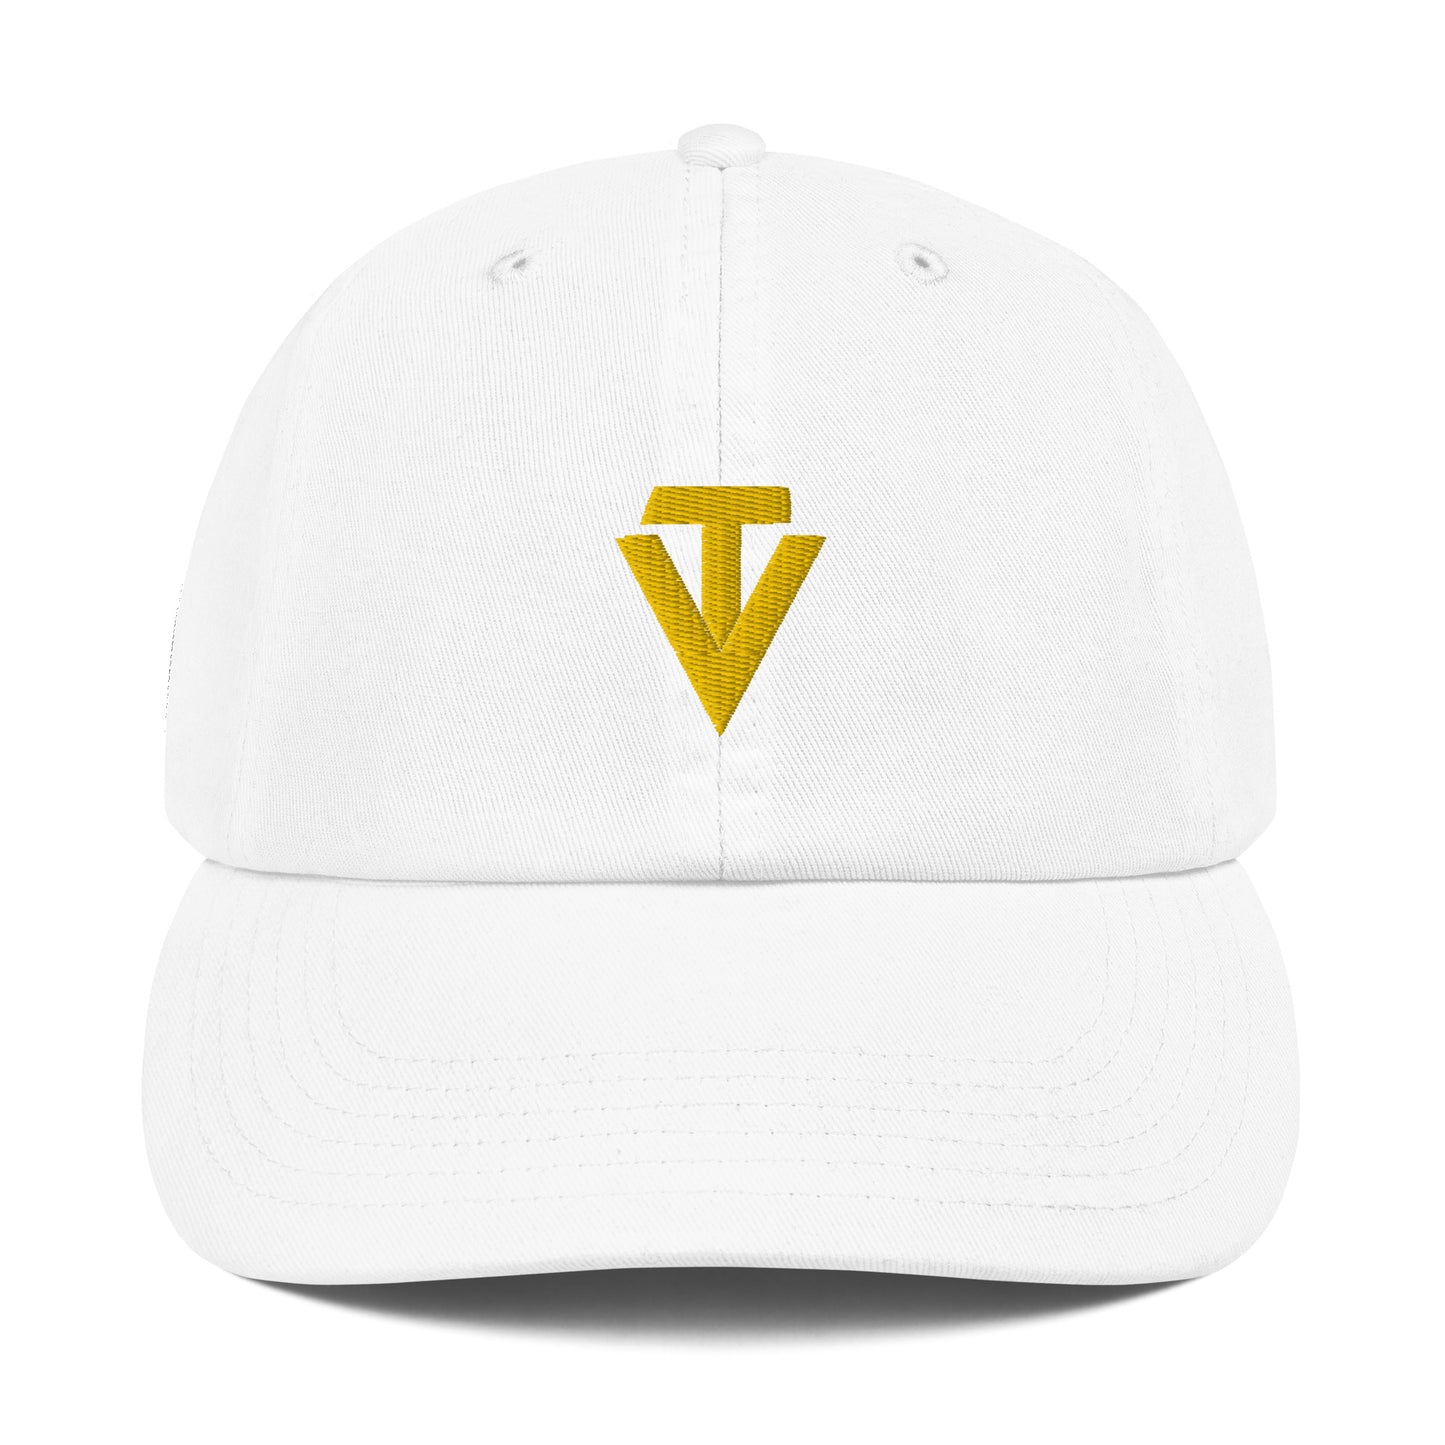 VT Embroidered Champion Dad Cap